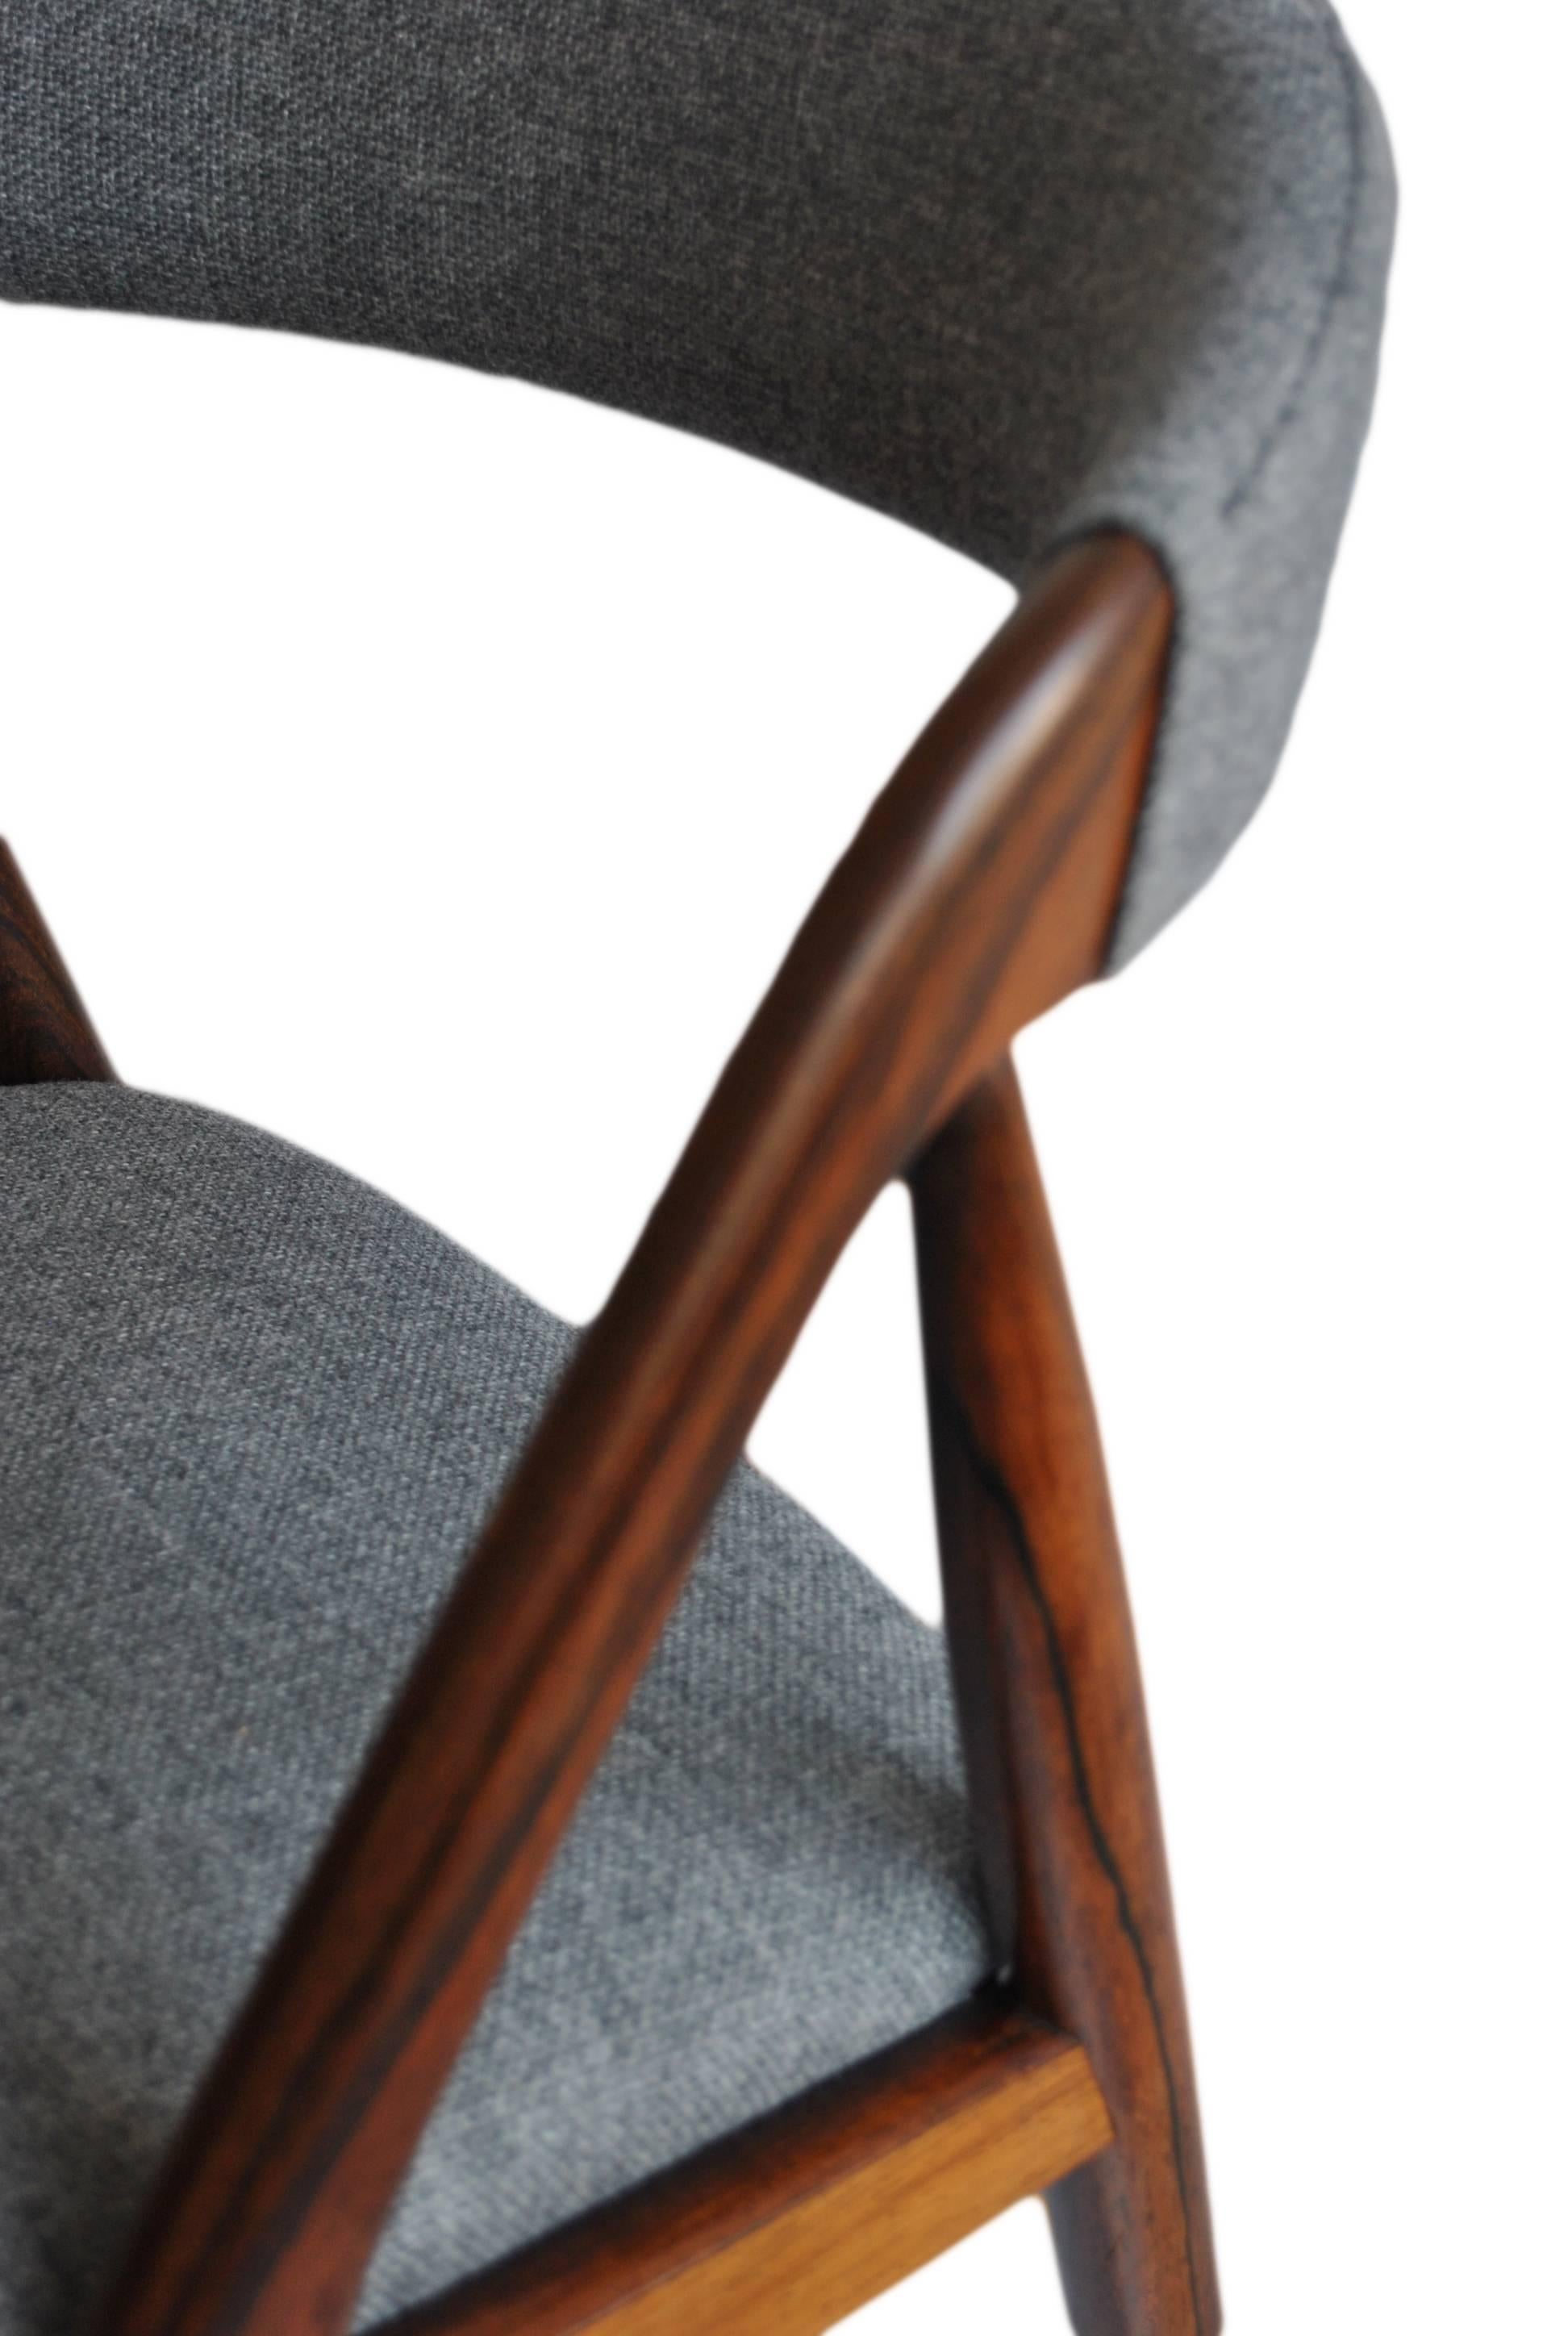 Kai Kristiansen Classic dining chairs in Brazilian rosewood with new Danish wool/cotton weave upholstery. Others available. 
1960s originals, repolished. More in stock and matching circular extending table available.